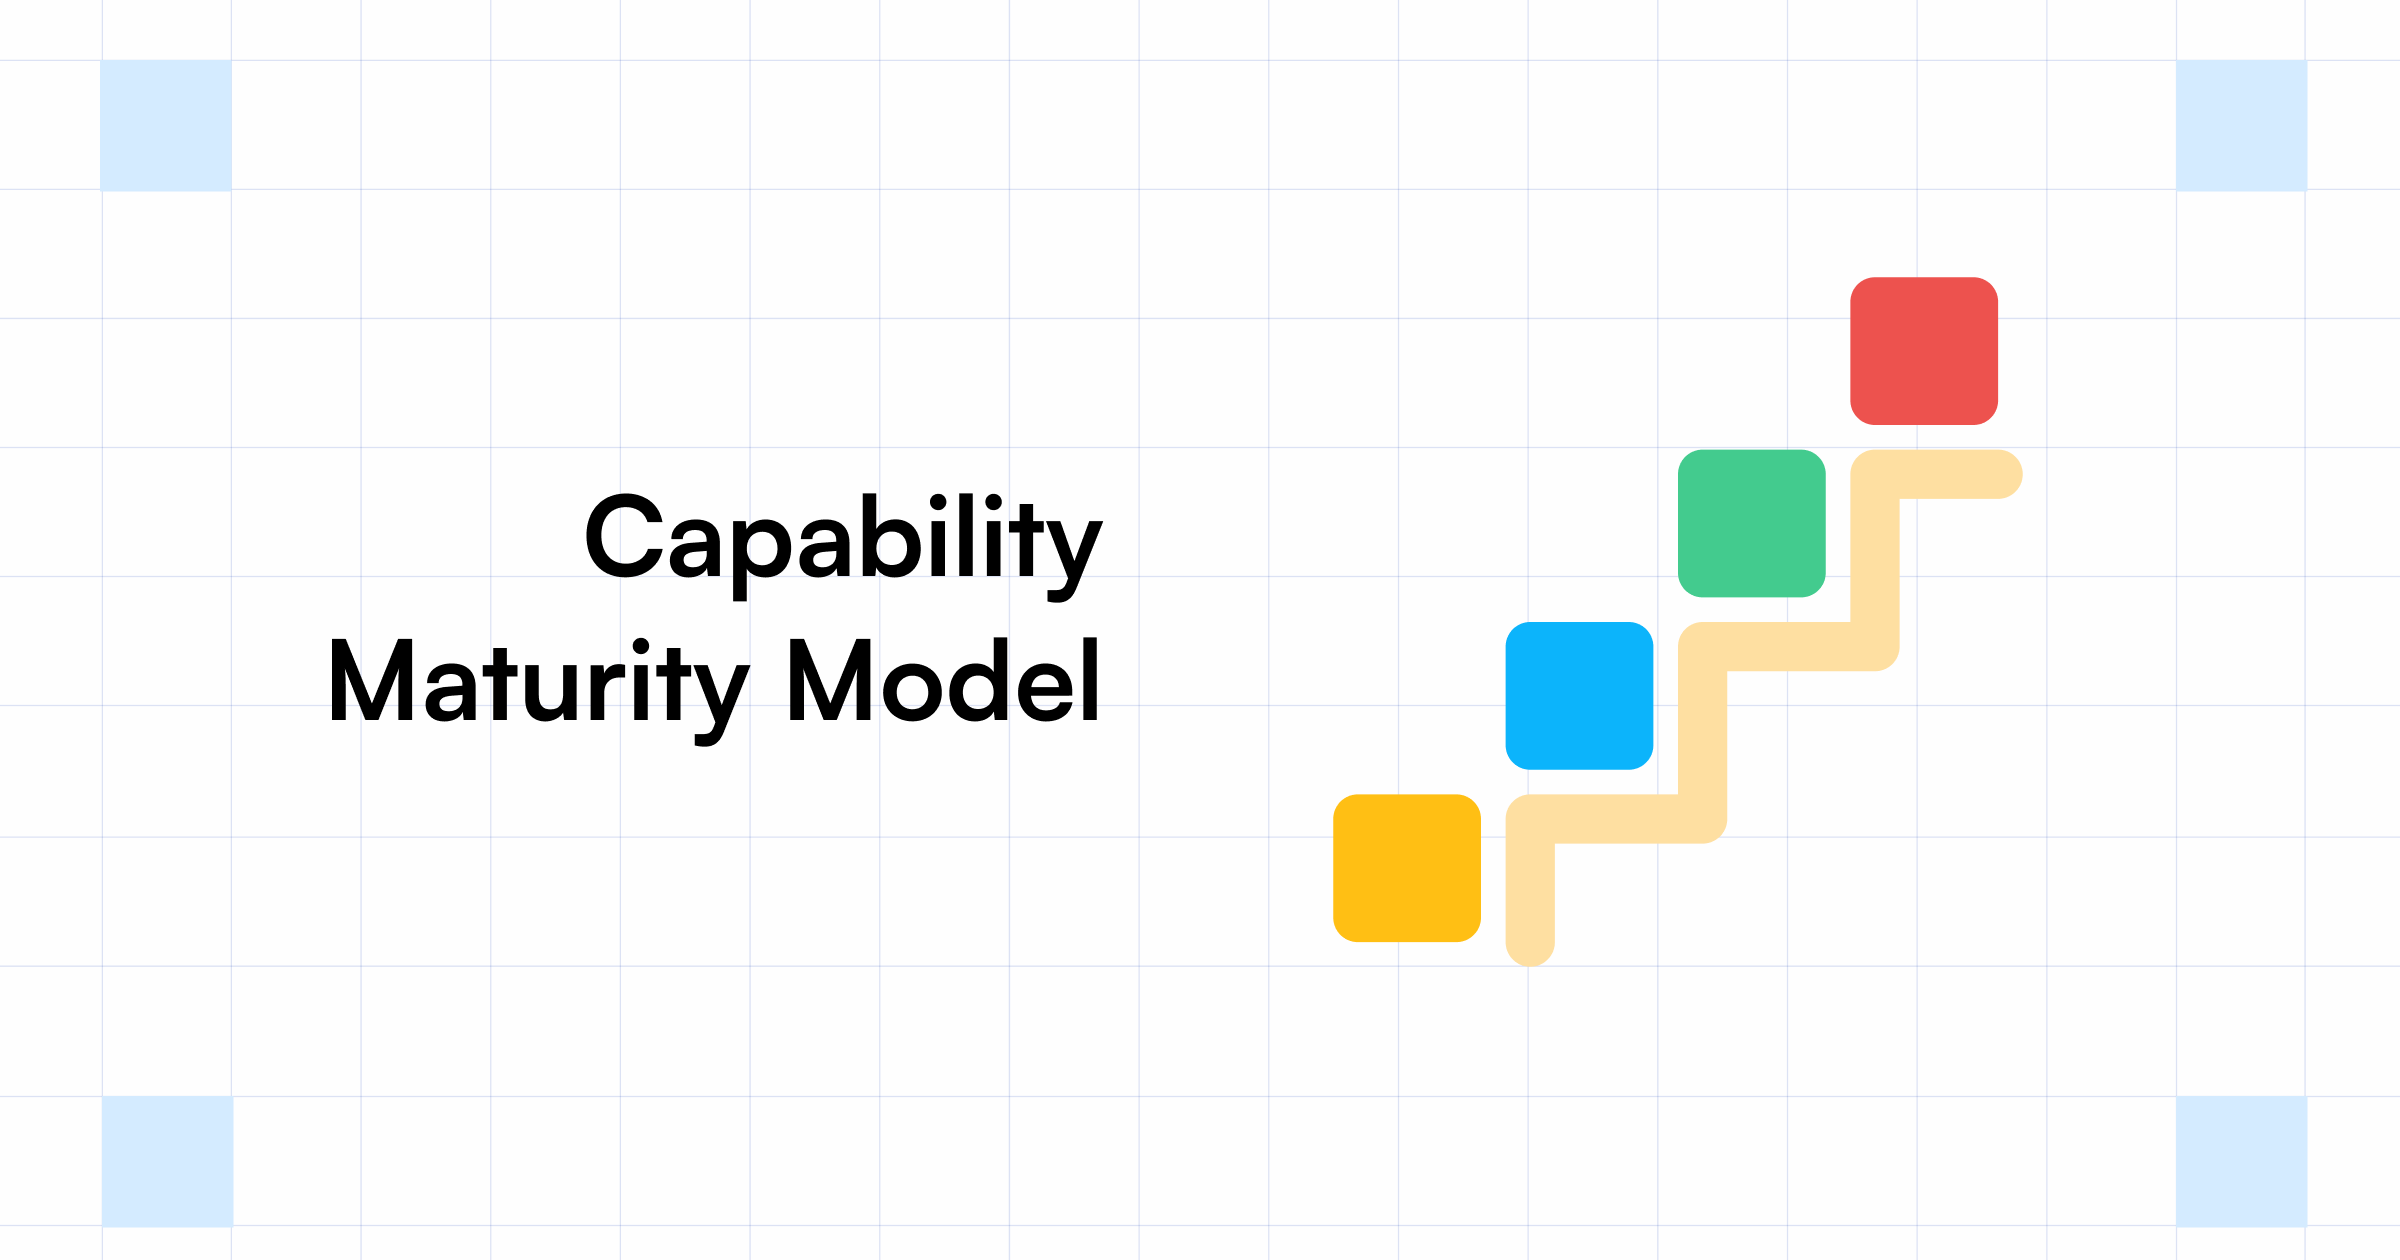 Capability Maturity Model for Software Development Teams